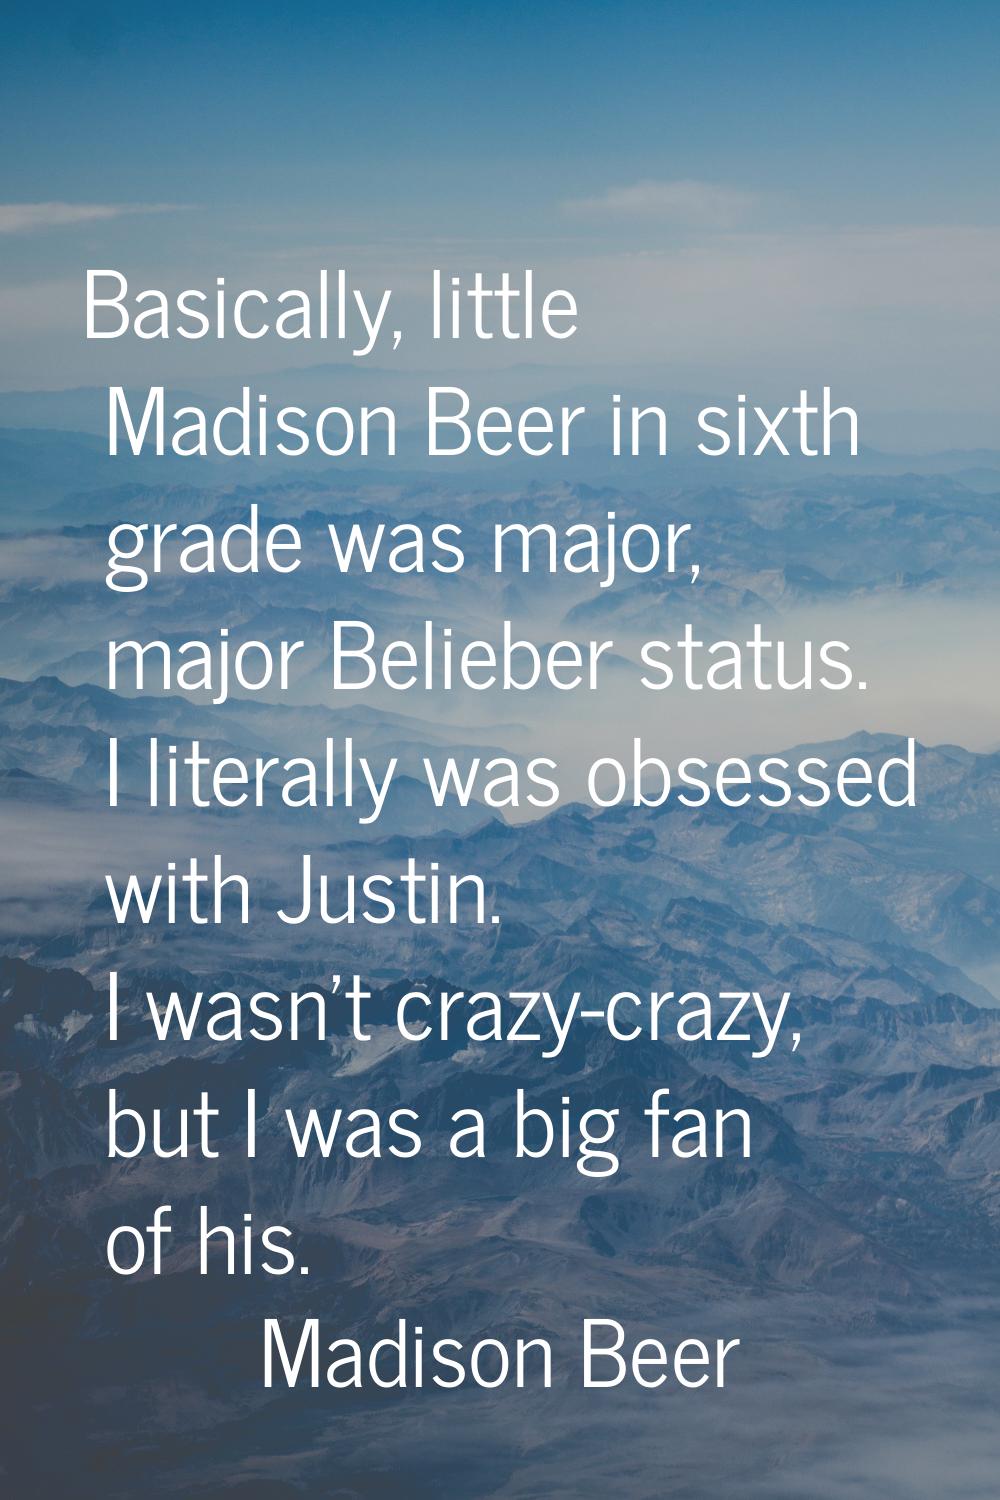 Basically, little Madison Beer in sixth grade was major, major Belieber status. I literally was obs